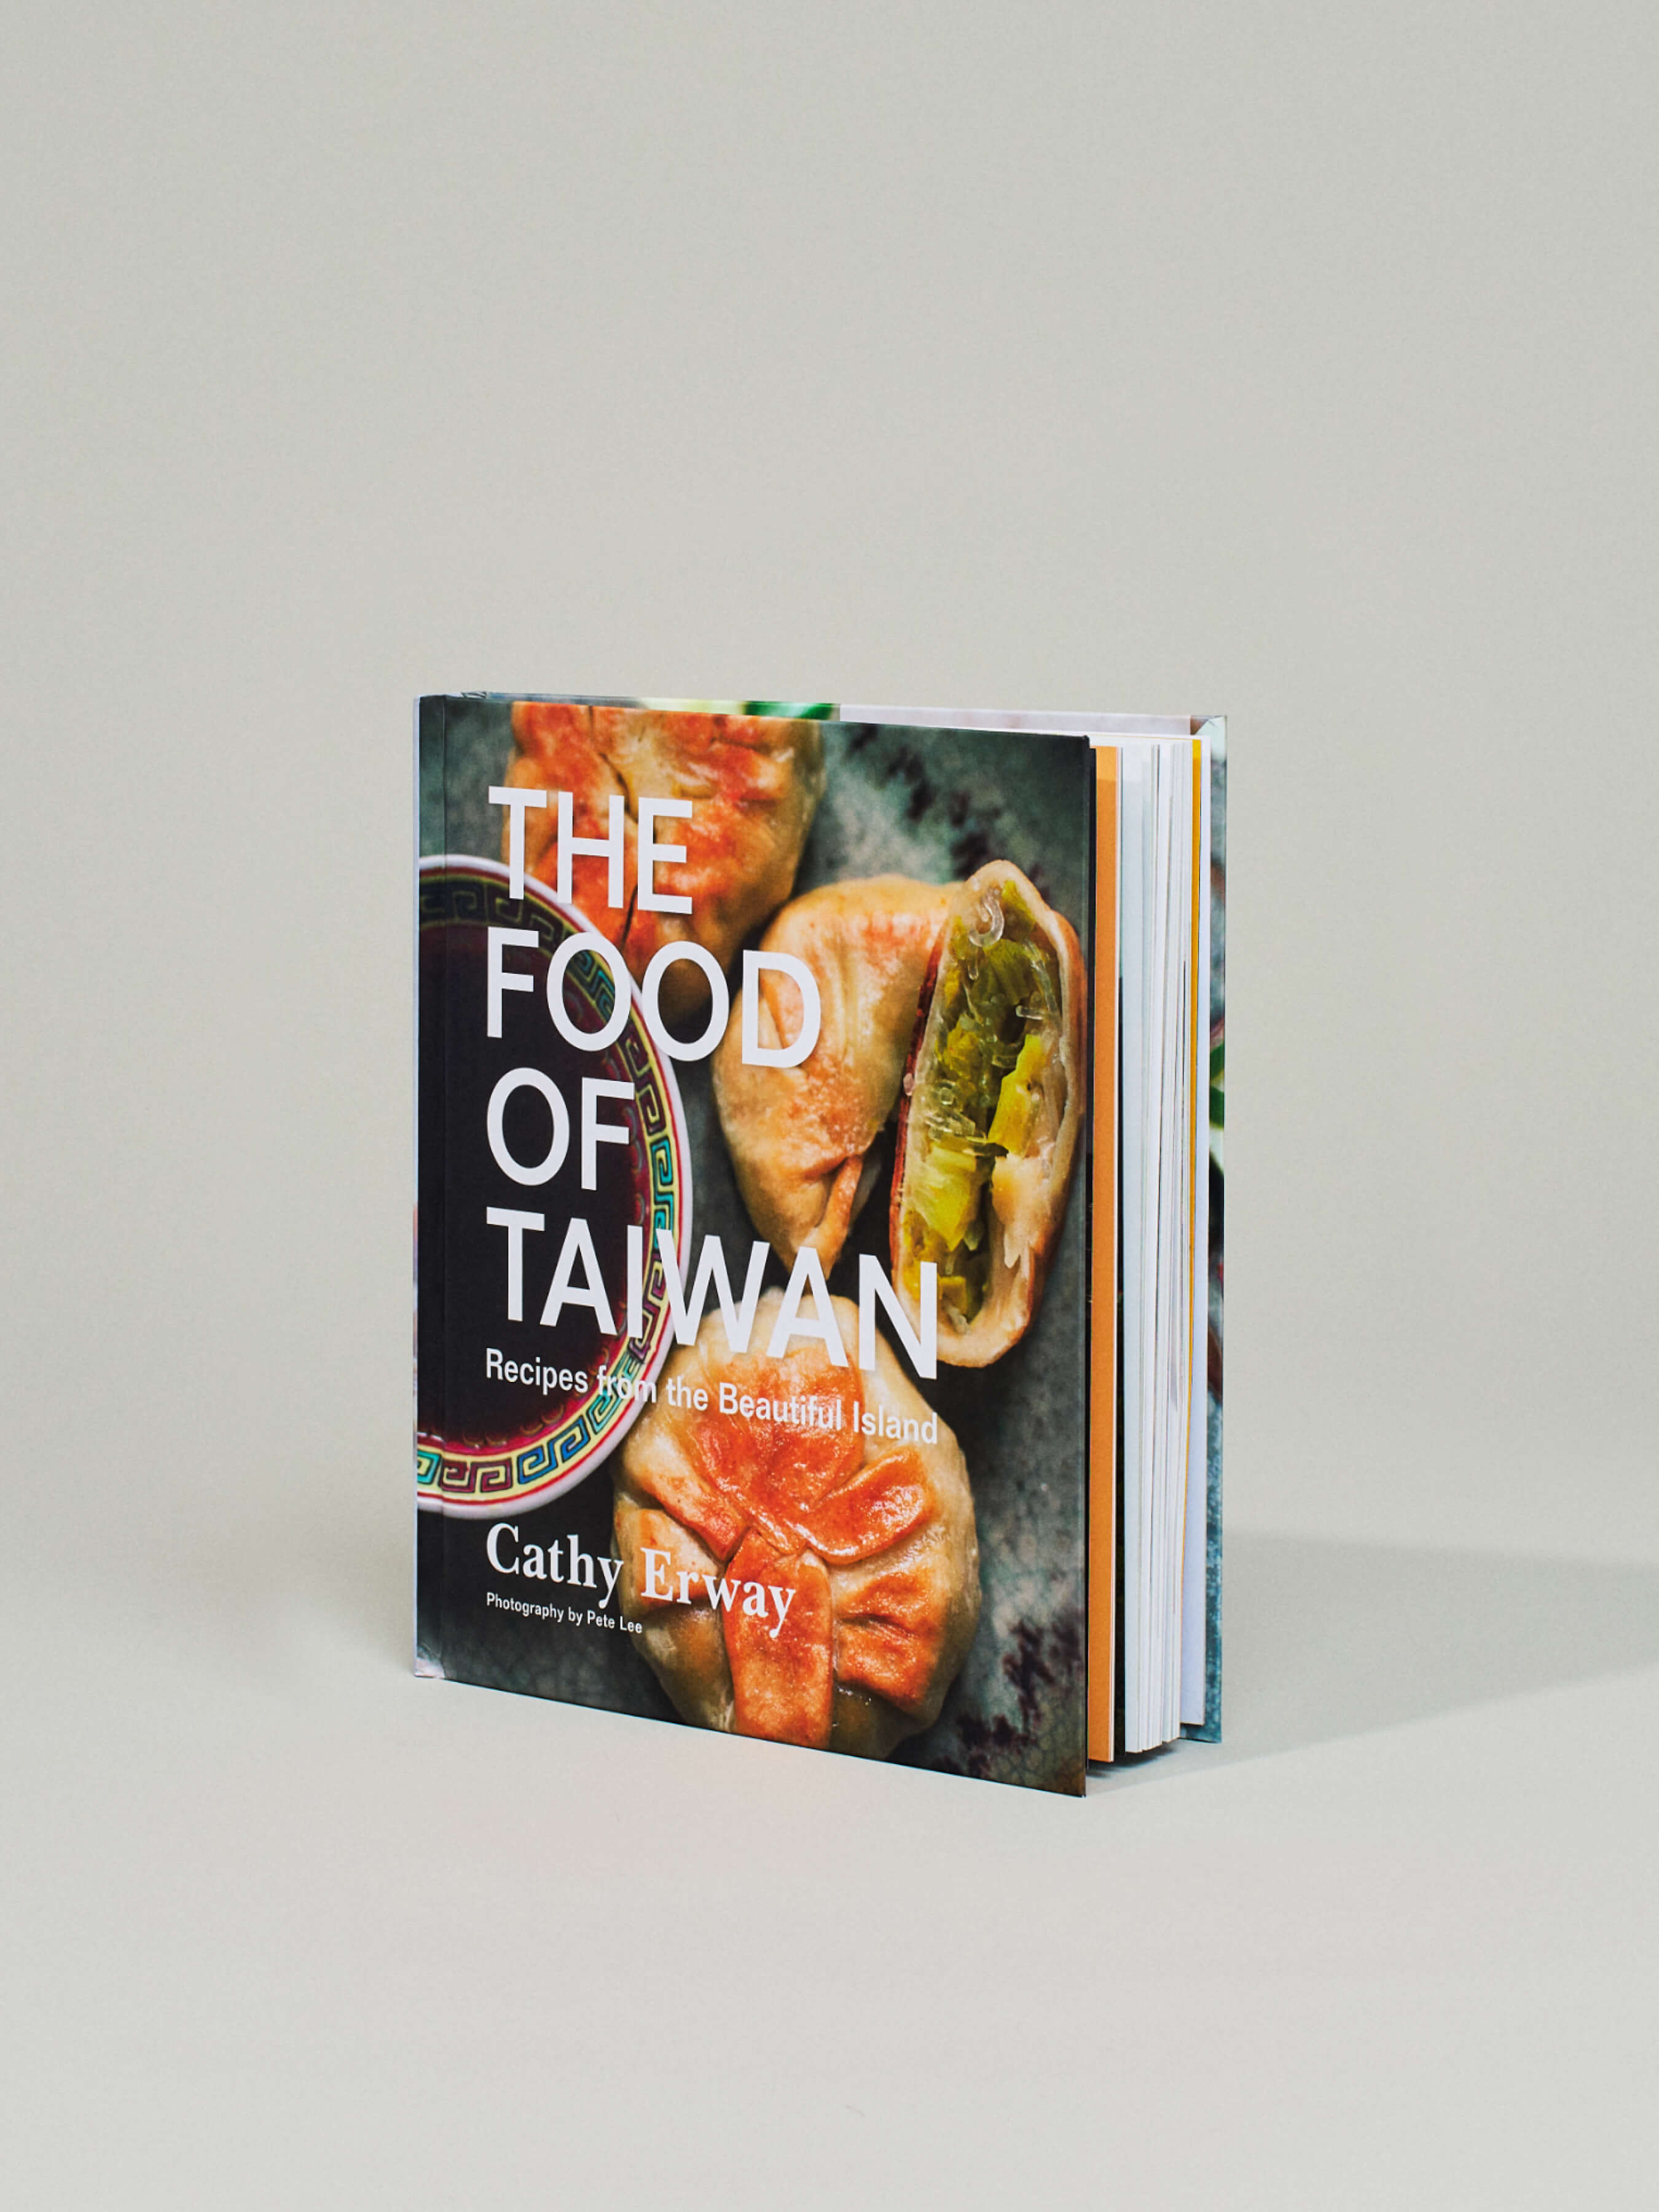 The Food of Taiwan: Recipes from the Beautiful Island